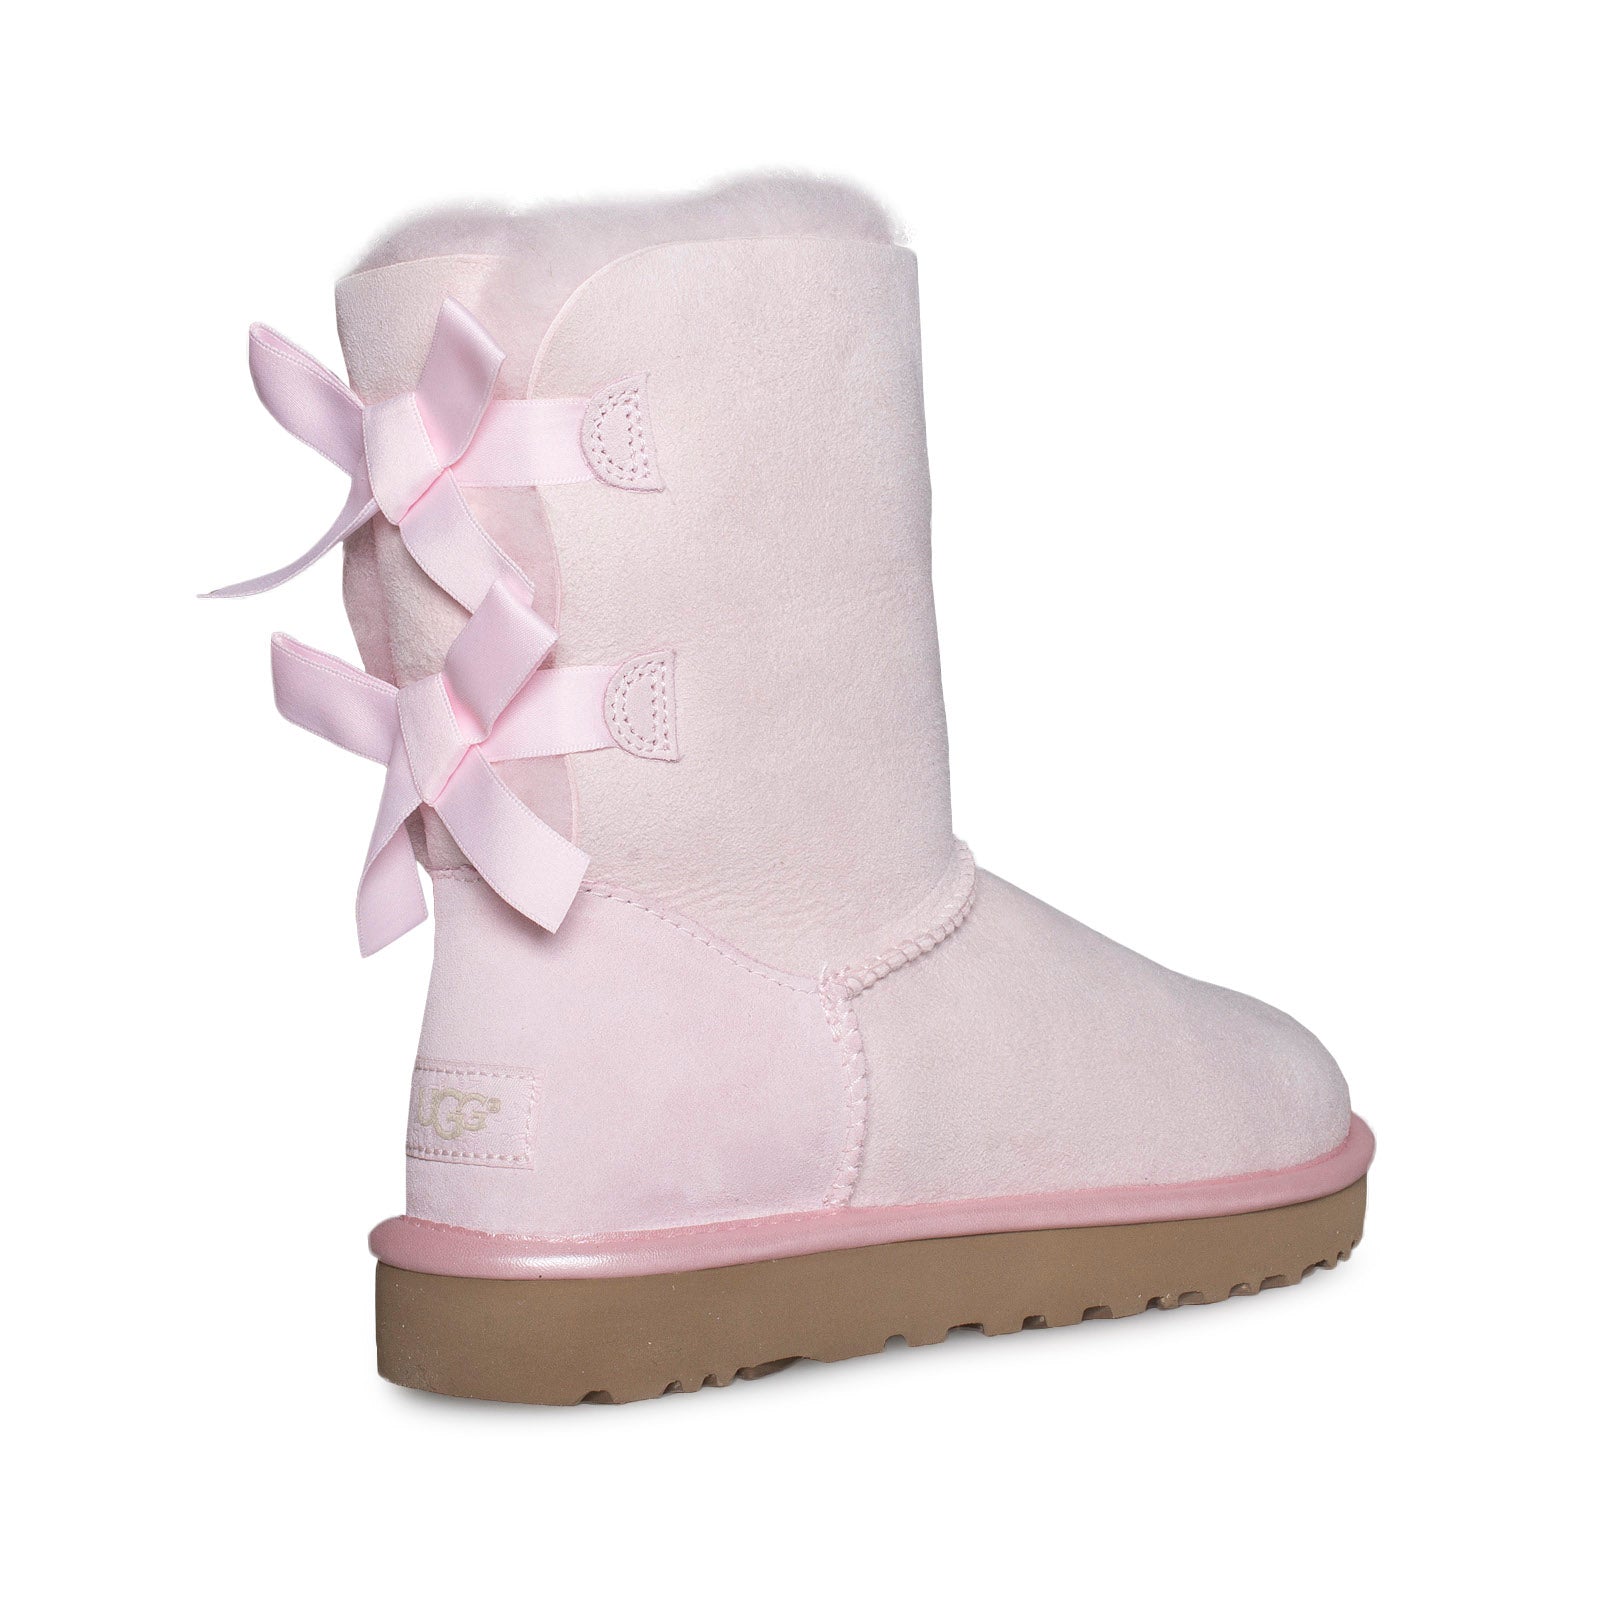 pink bailey button uggs